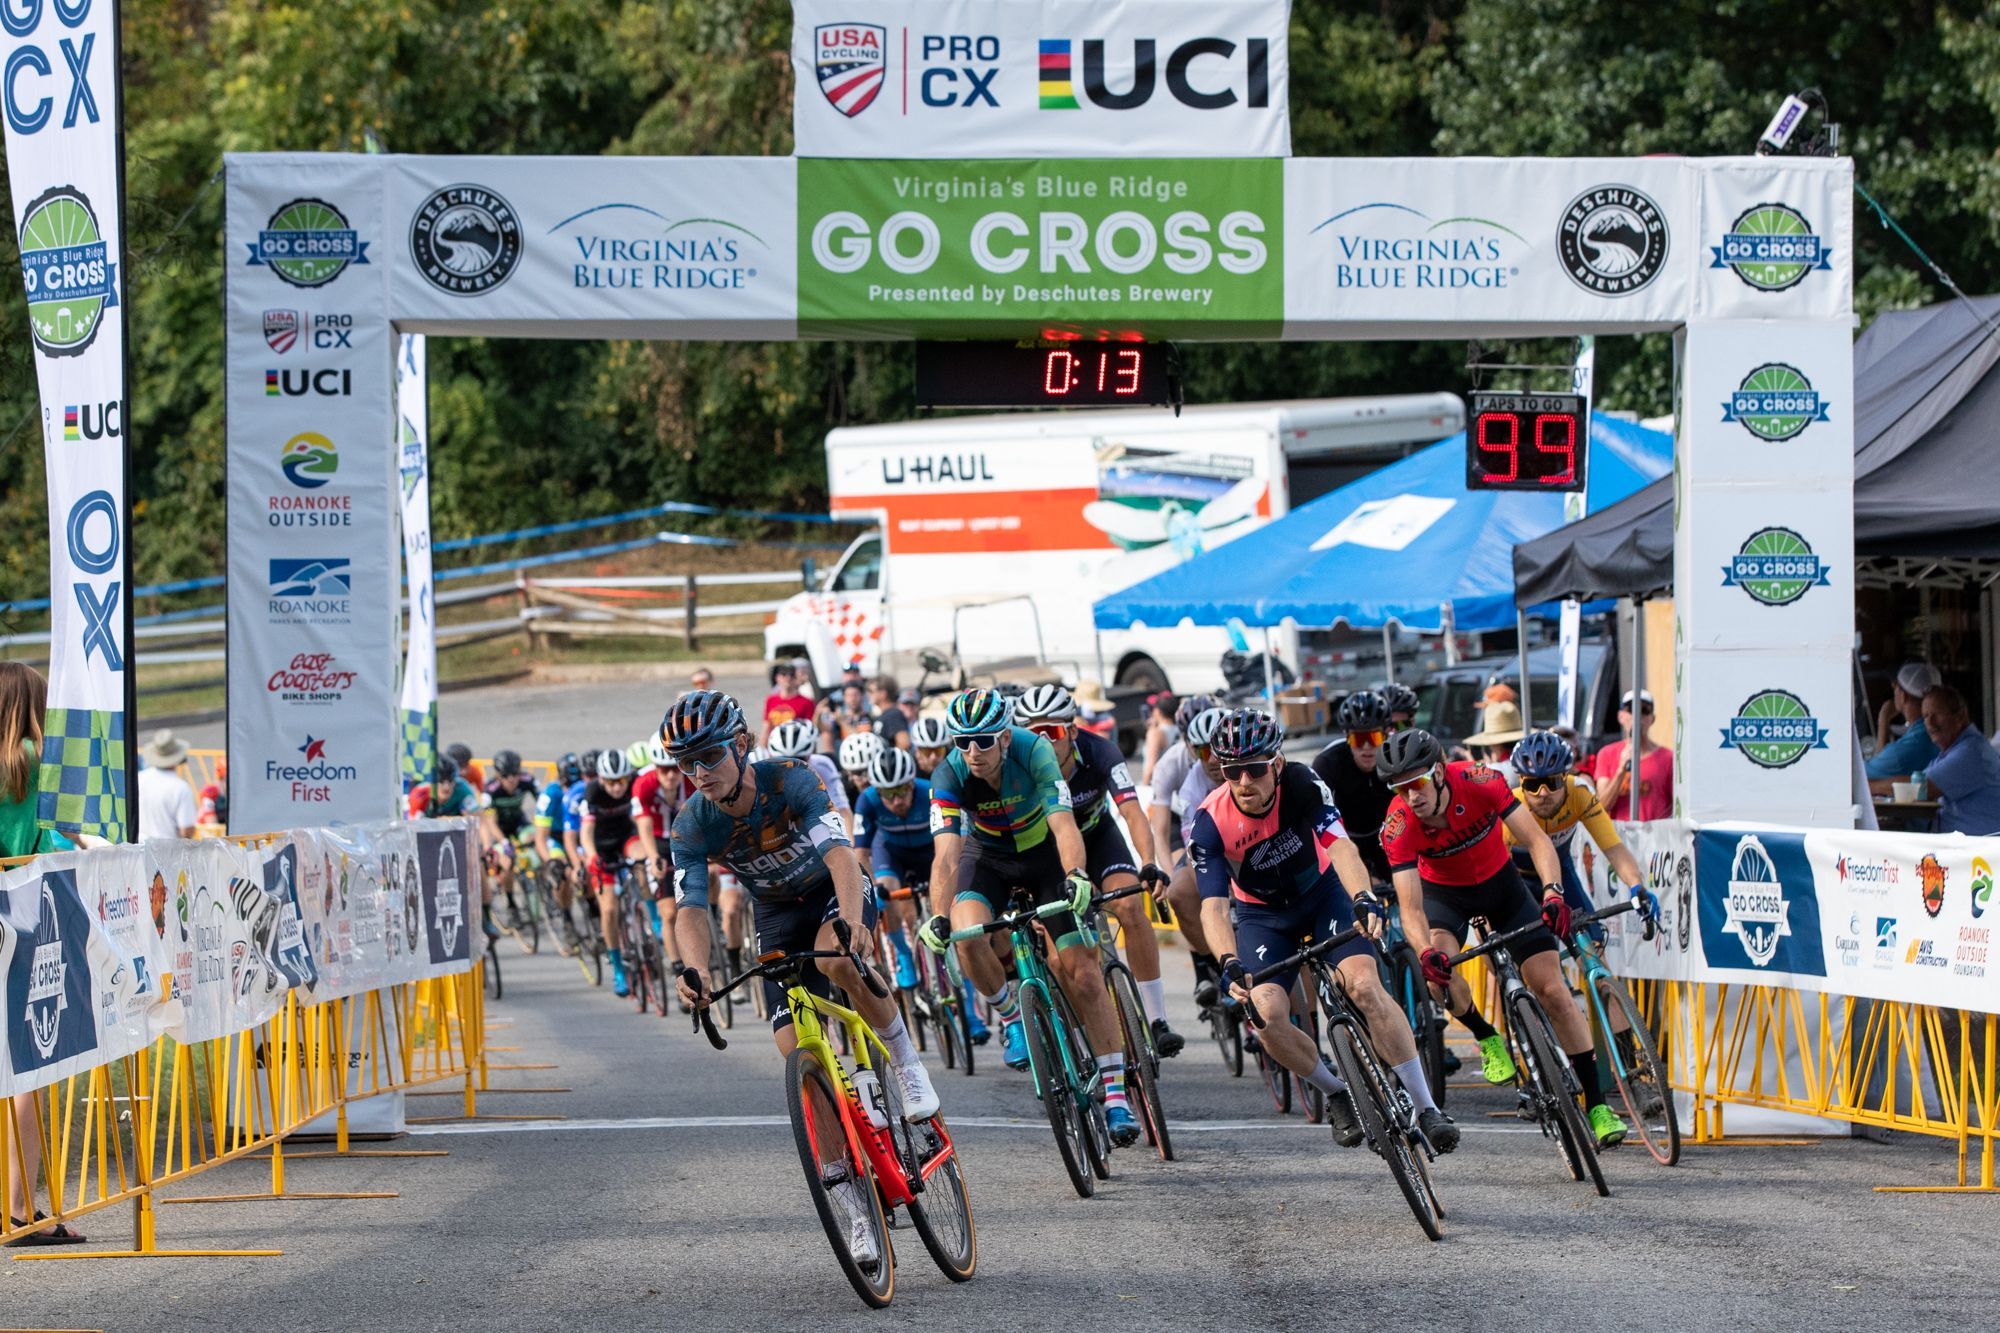 How can I watch the USCX cyclocross series on GCN+? GCN